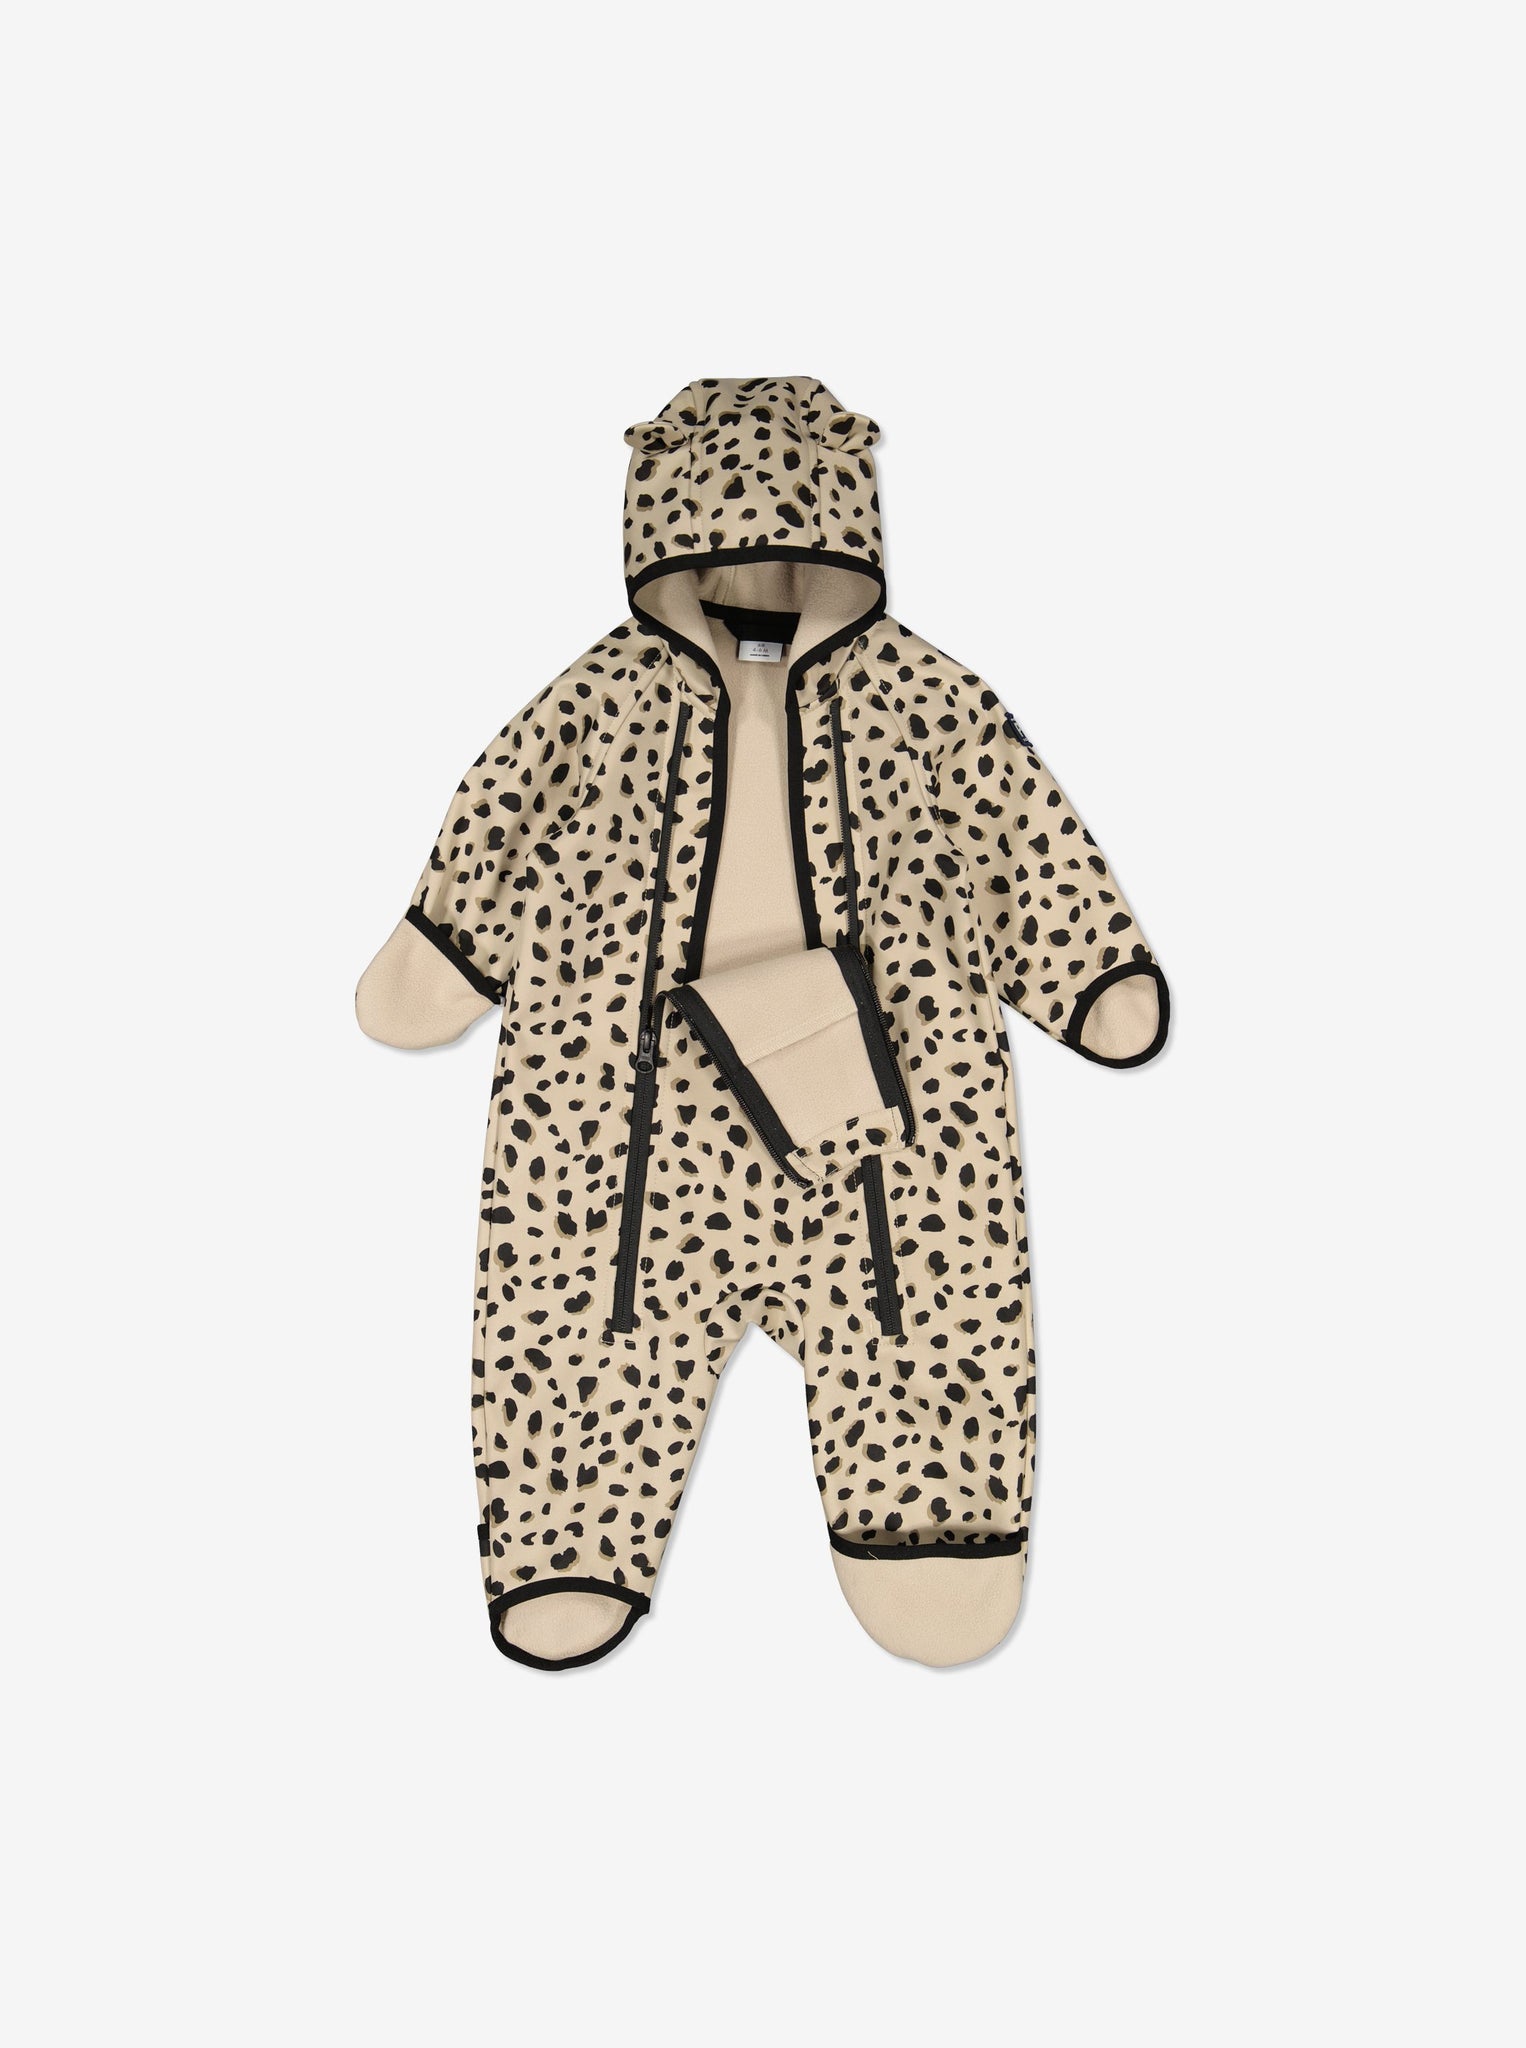 Leopard Print Windproof Baby Pramsuit from Polarn O. Pyret Kidswear. 